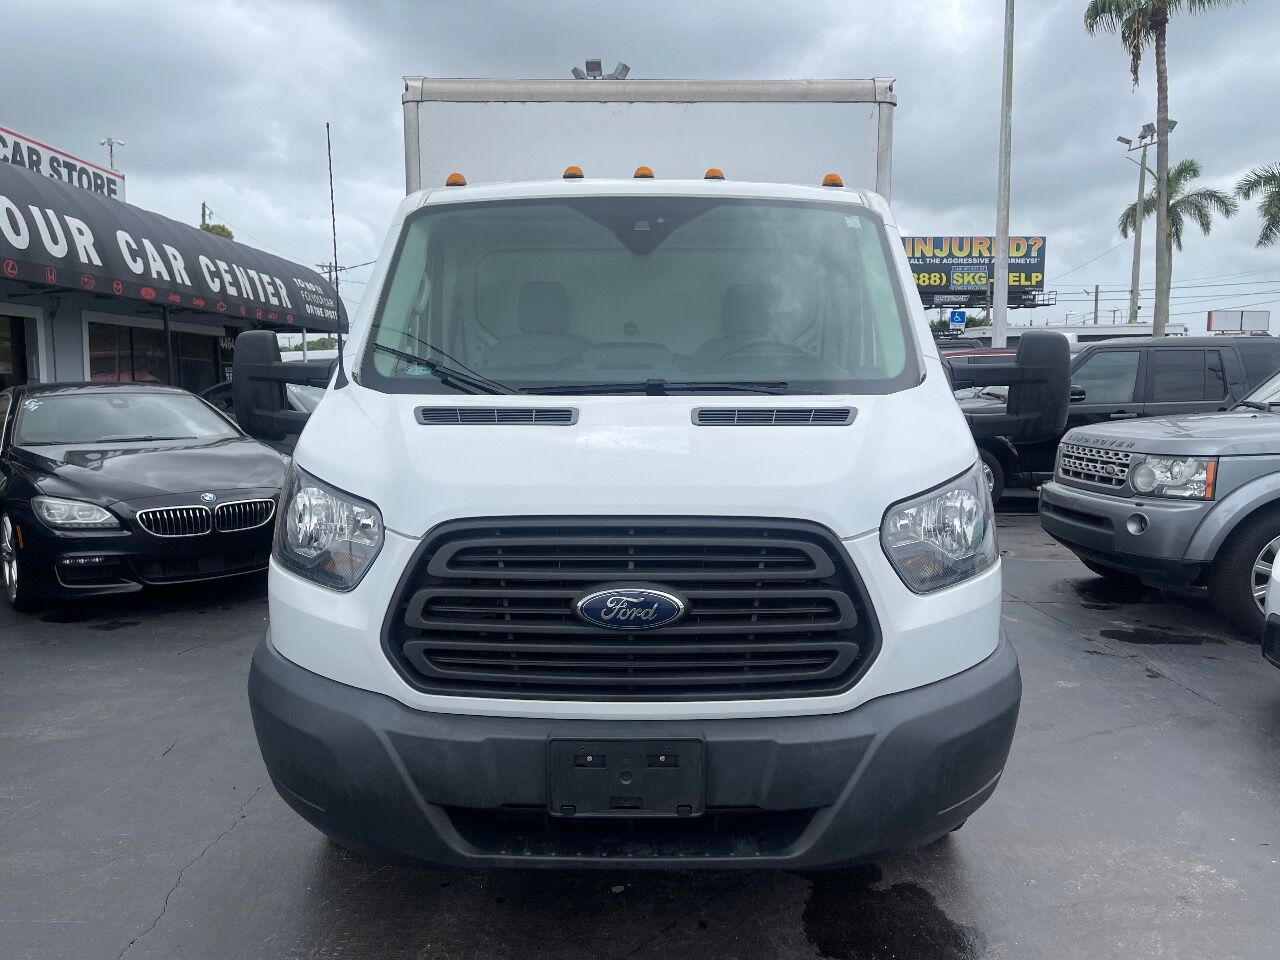 2018 FORD Transit Incomplete - $27,900